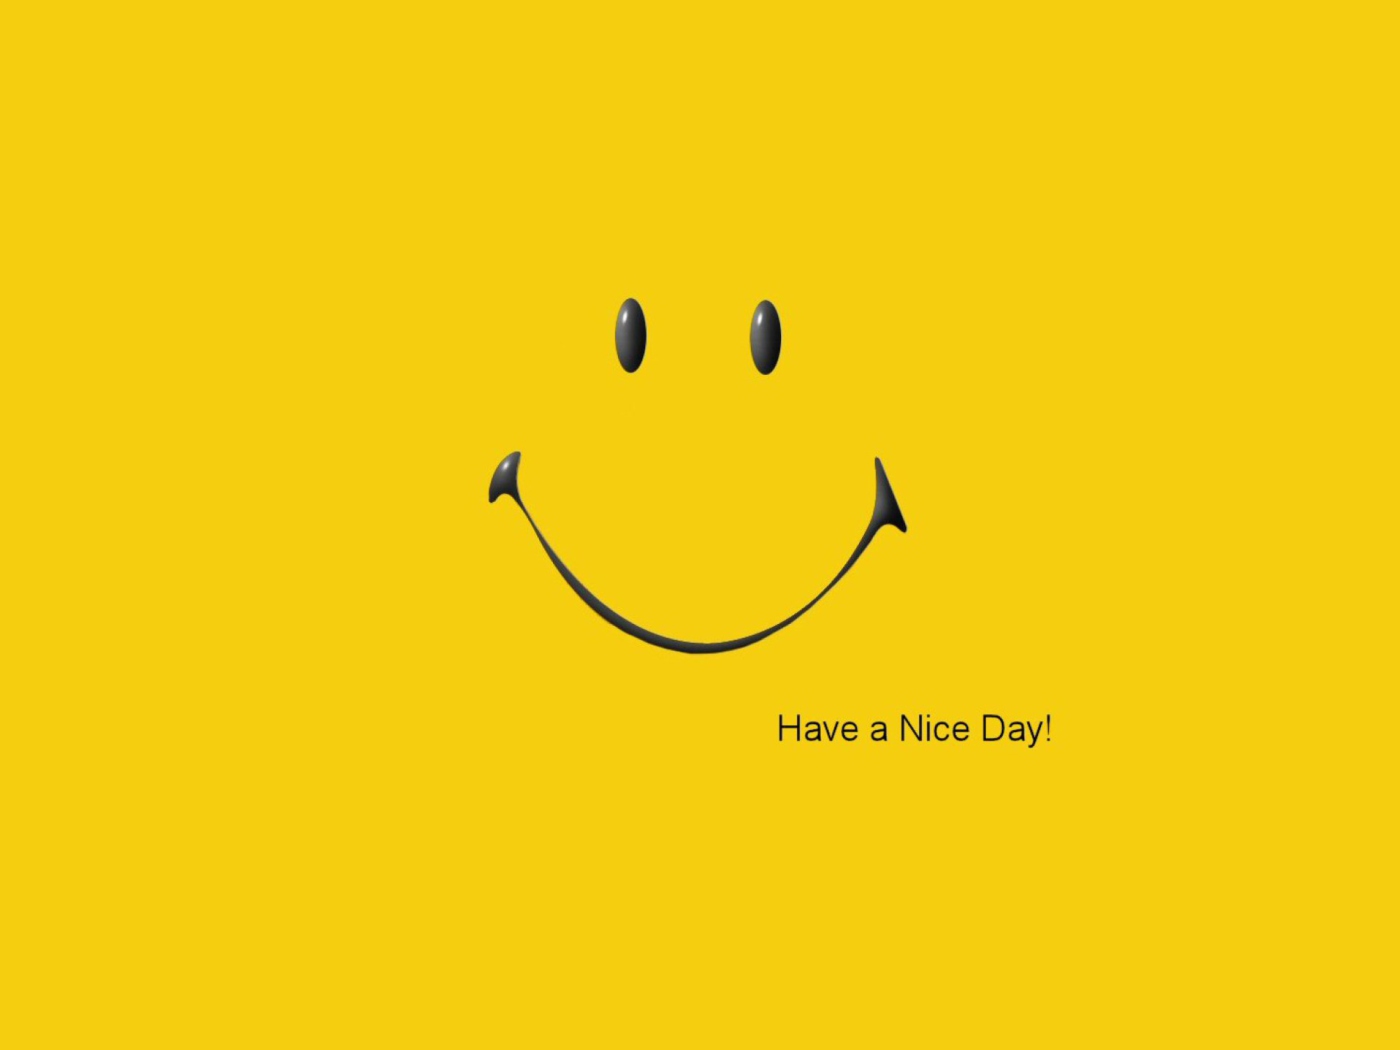 Have A Nice Day wallpaper 1400x1050